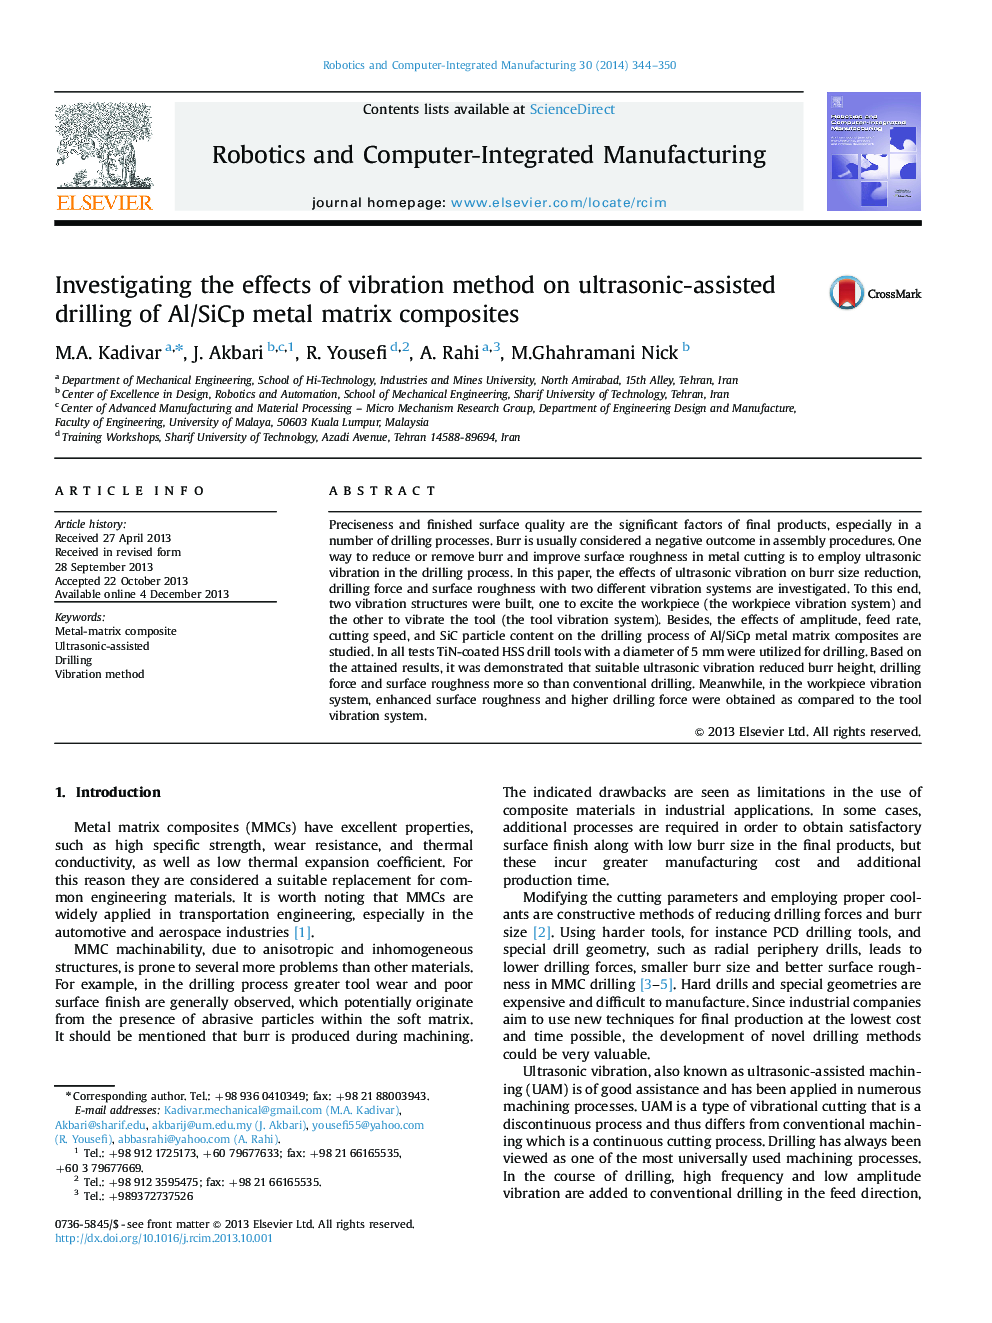 Investigating the effects of vibration method on ultrasonic-assisted drilling of Al/SiCp metal matrix composites